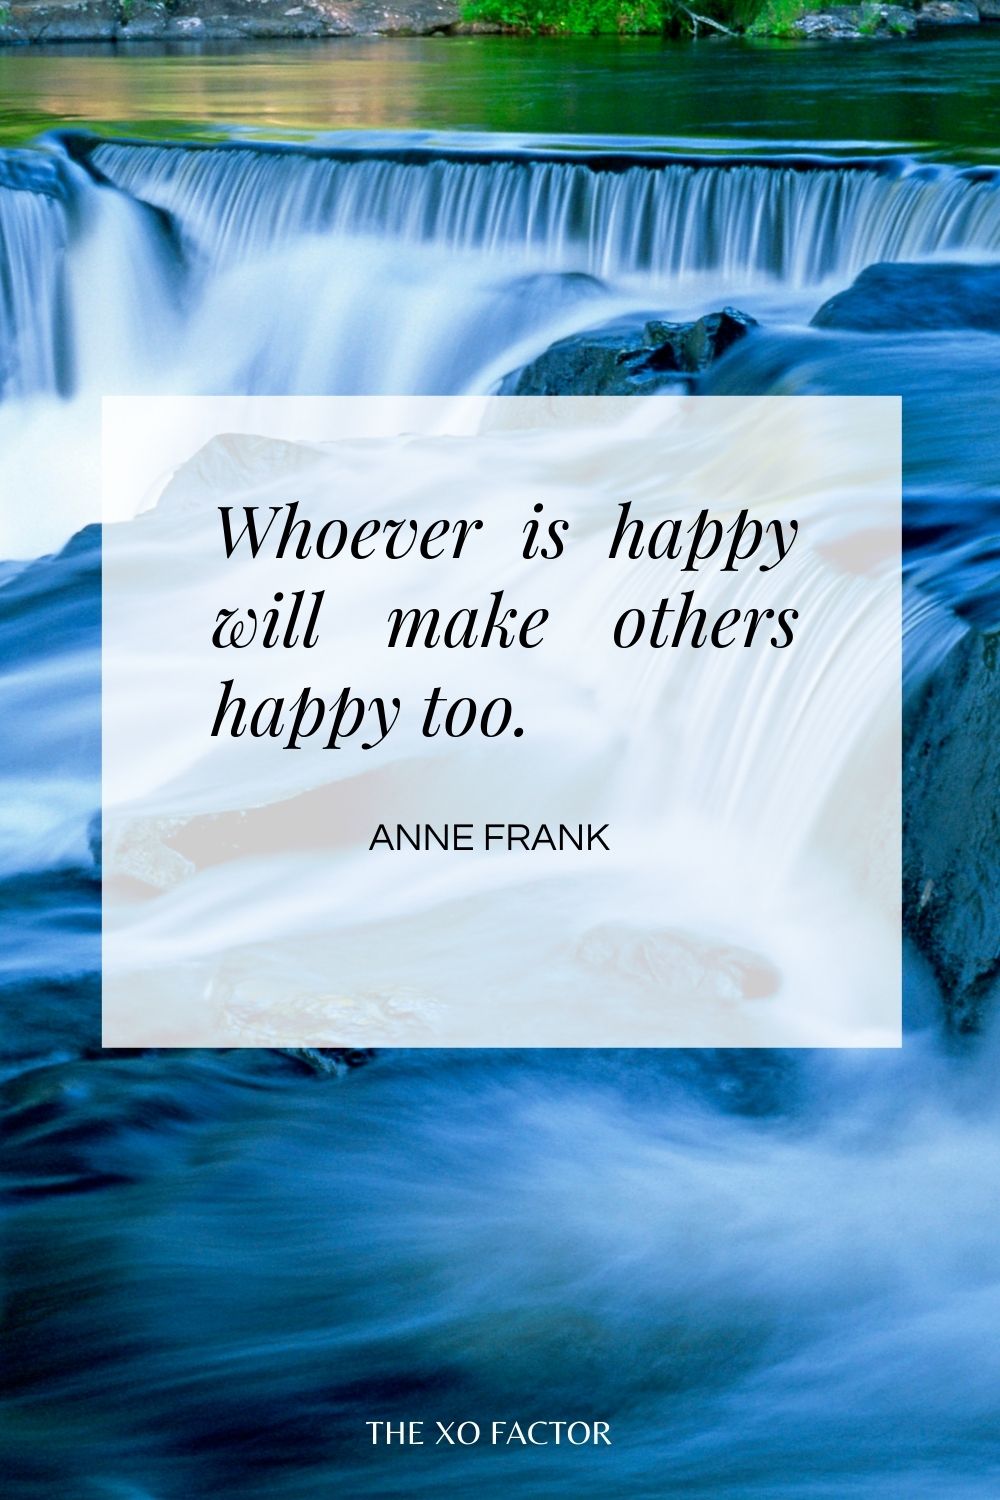 Whoever is happy will make others happy too.  Anne Frank